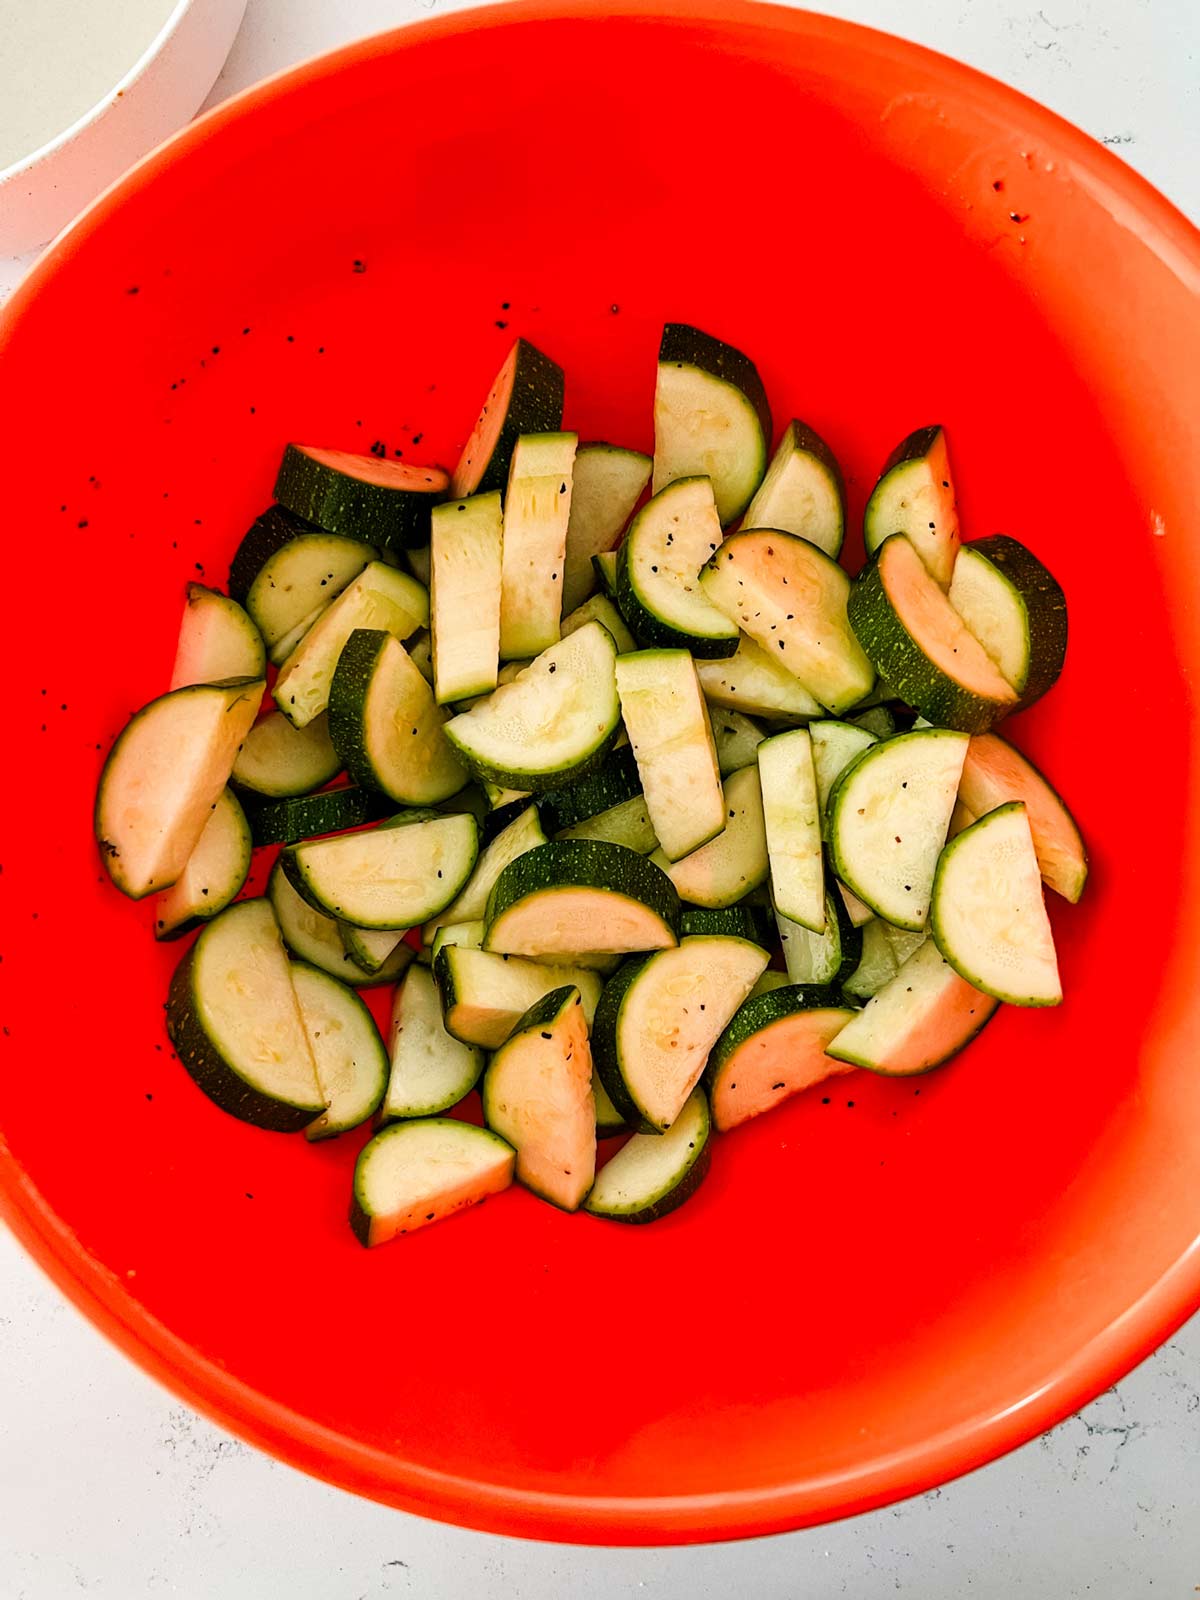 Overhead photo of halved and sliced zucchini tossed with seasonings and oil in an orange bowl.